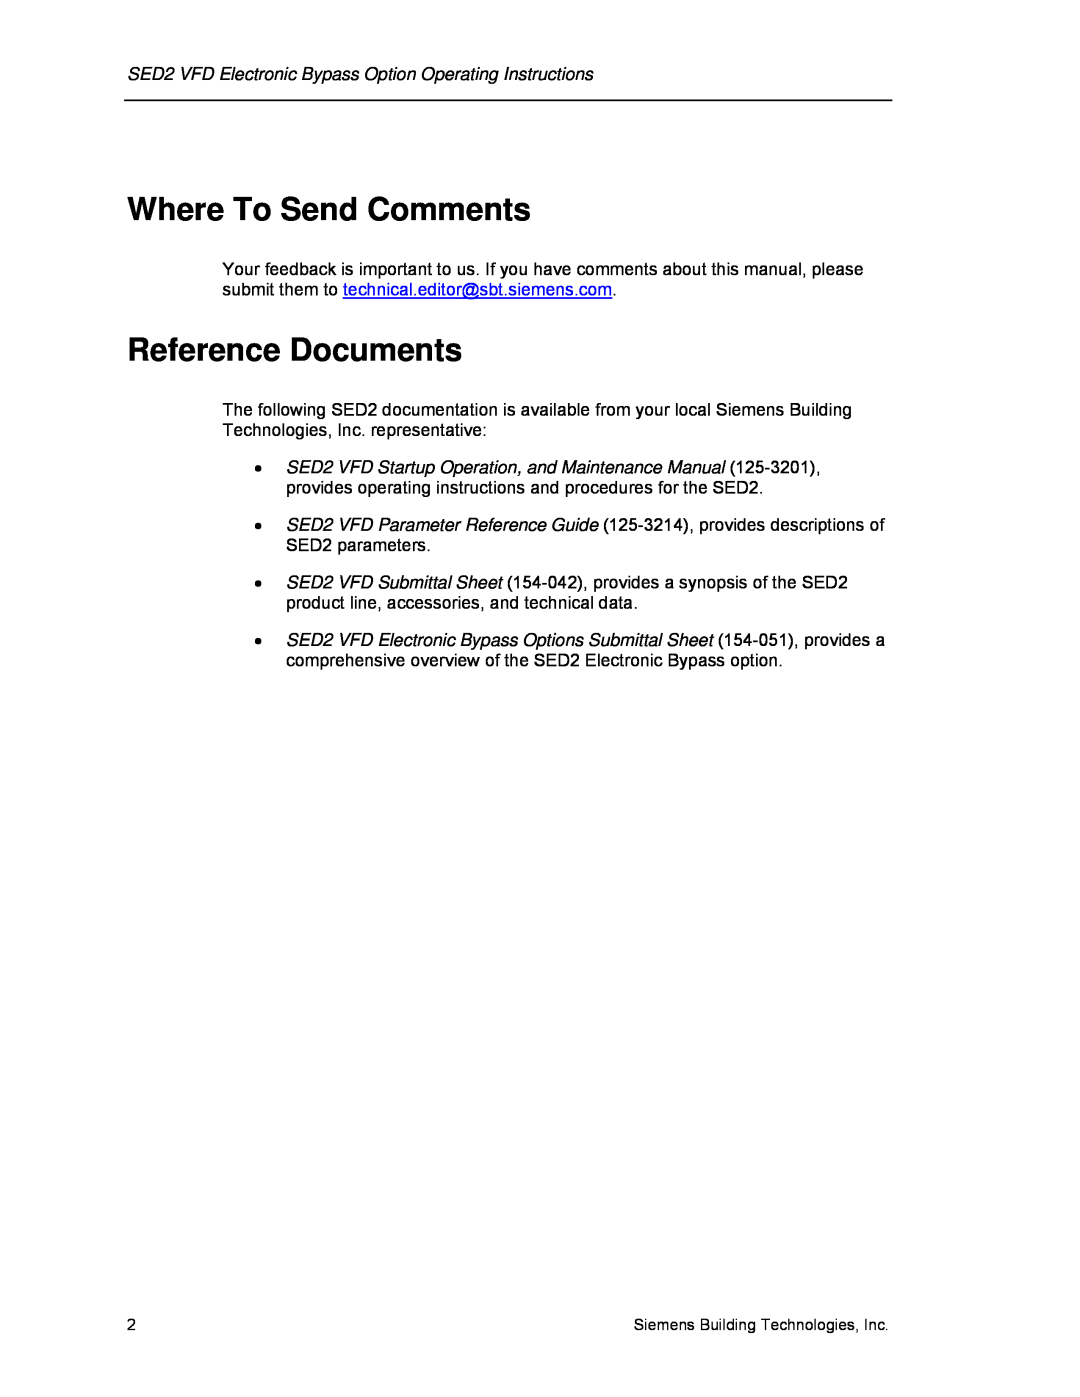 Siemens 125-3208 operating instructions Where To Send Comments, Reference Documents 